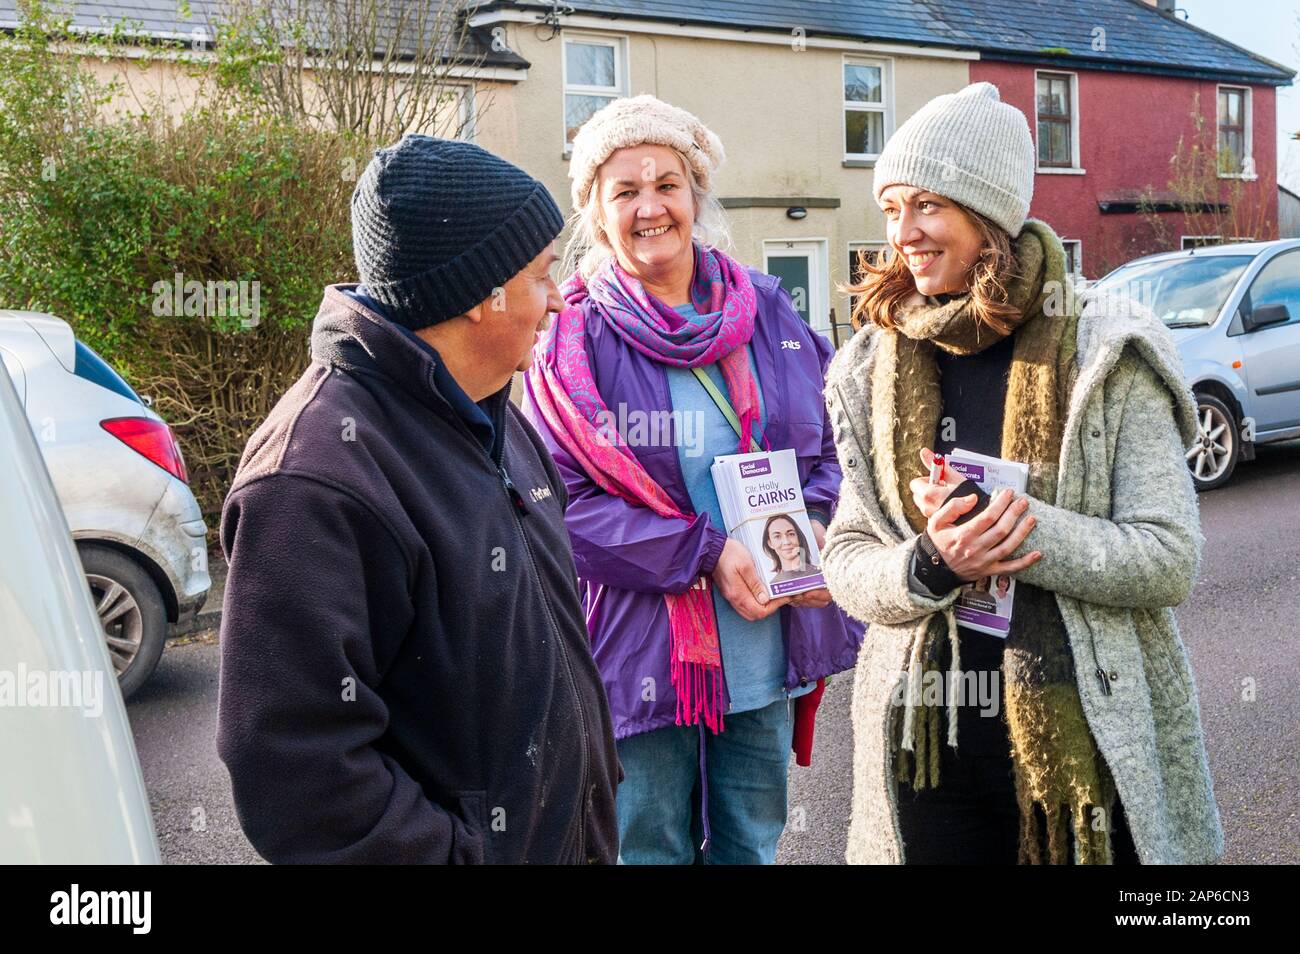 Social Democrat General Election candidate Cllr. Holly Cairns canvassing around Skibbereen with a team of volunteers. Stock Photo